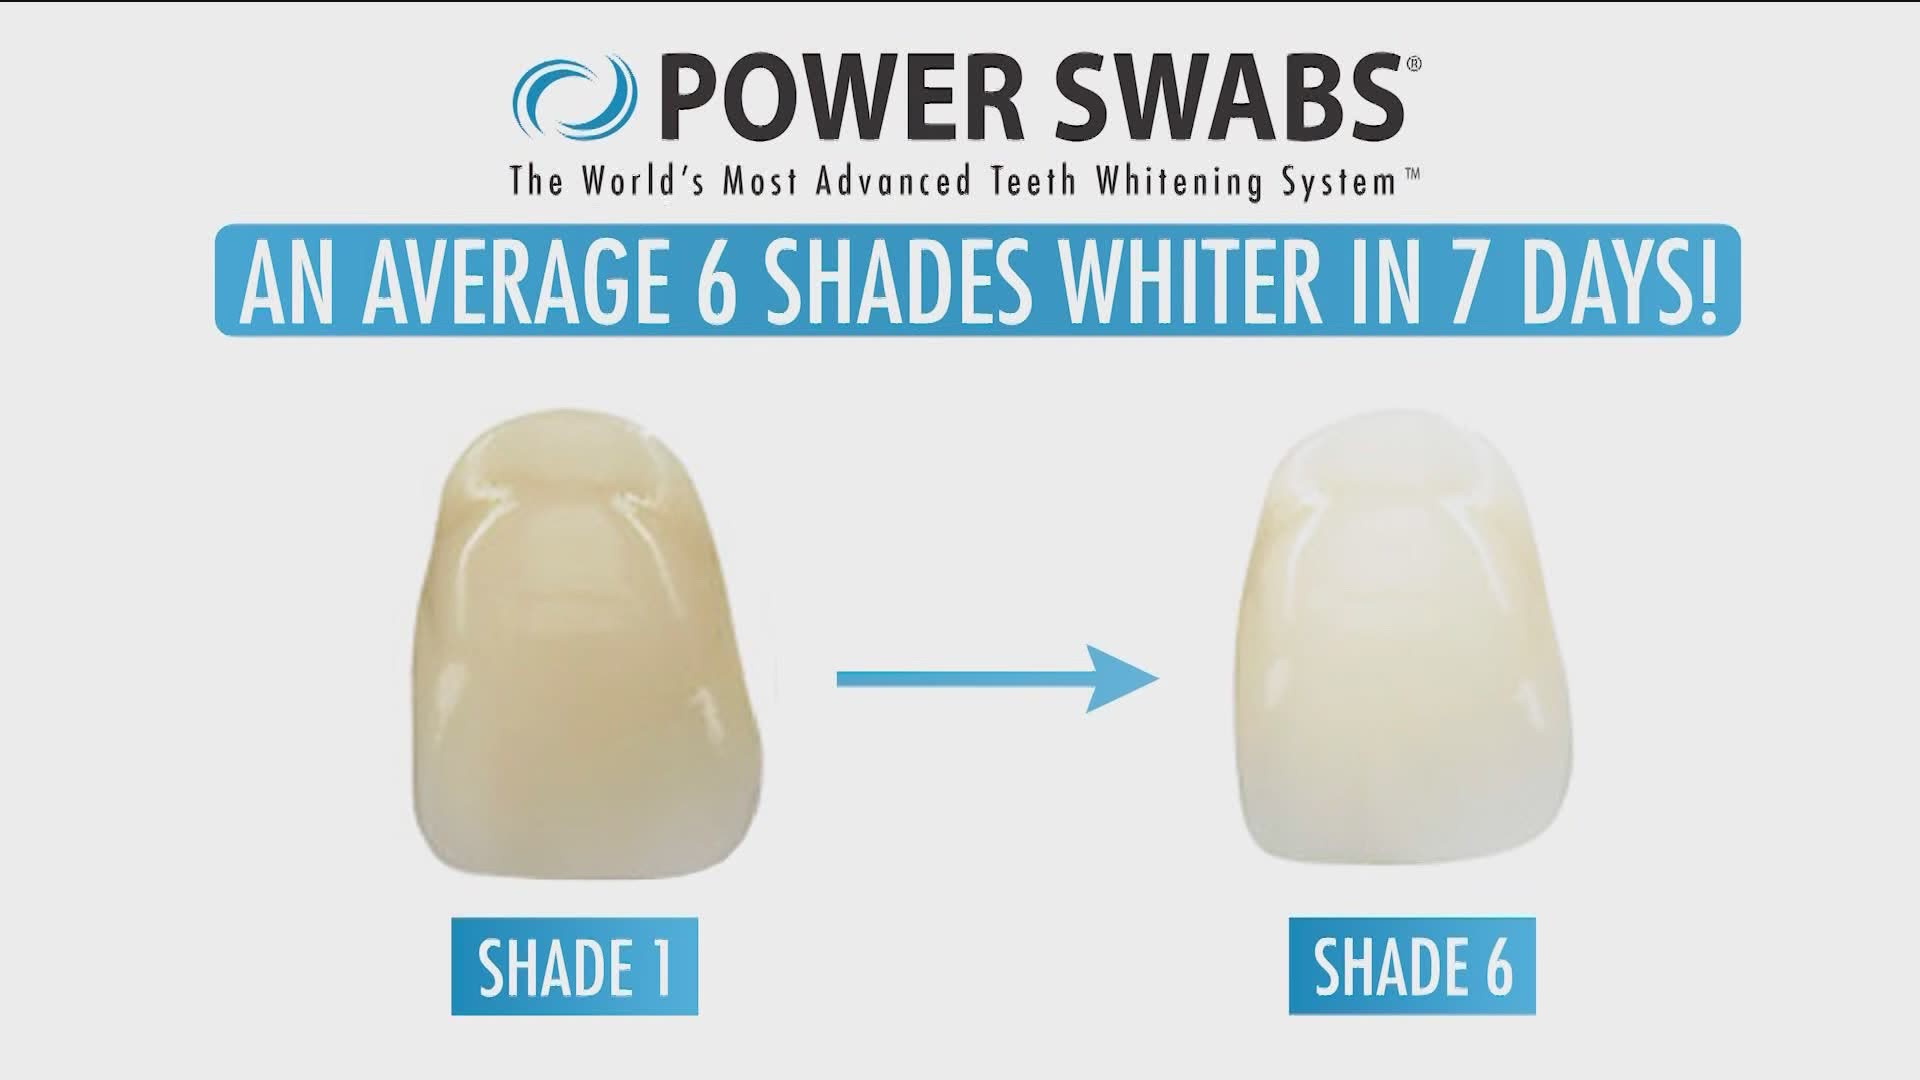 See how Power Swabs compares to other teeth whitening products